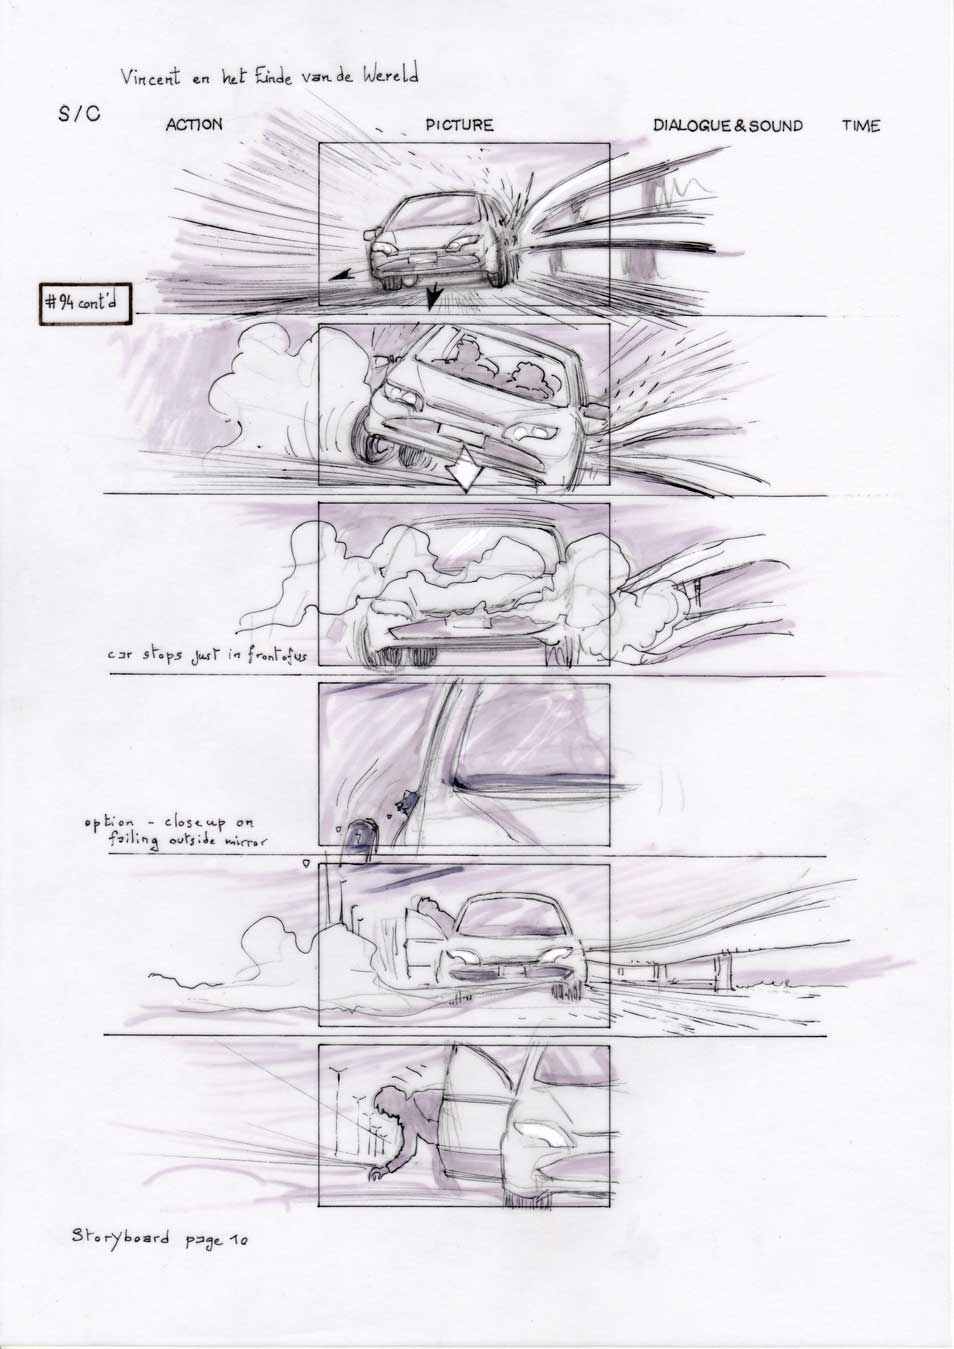 Vincent and the End of the World storyboard 10